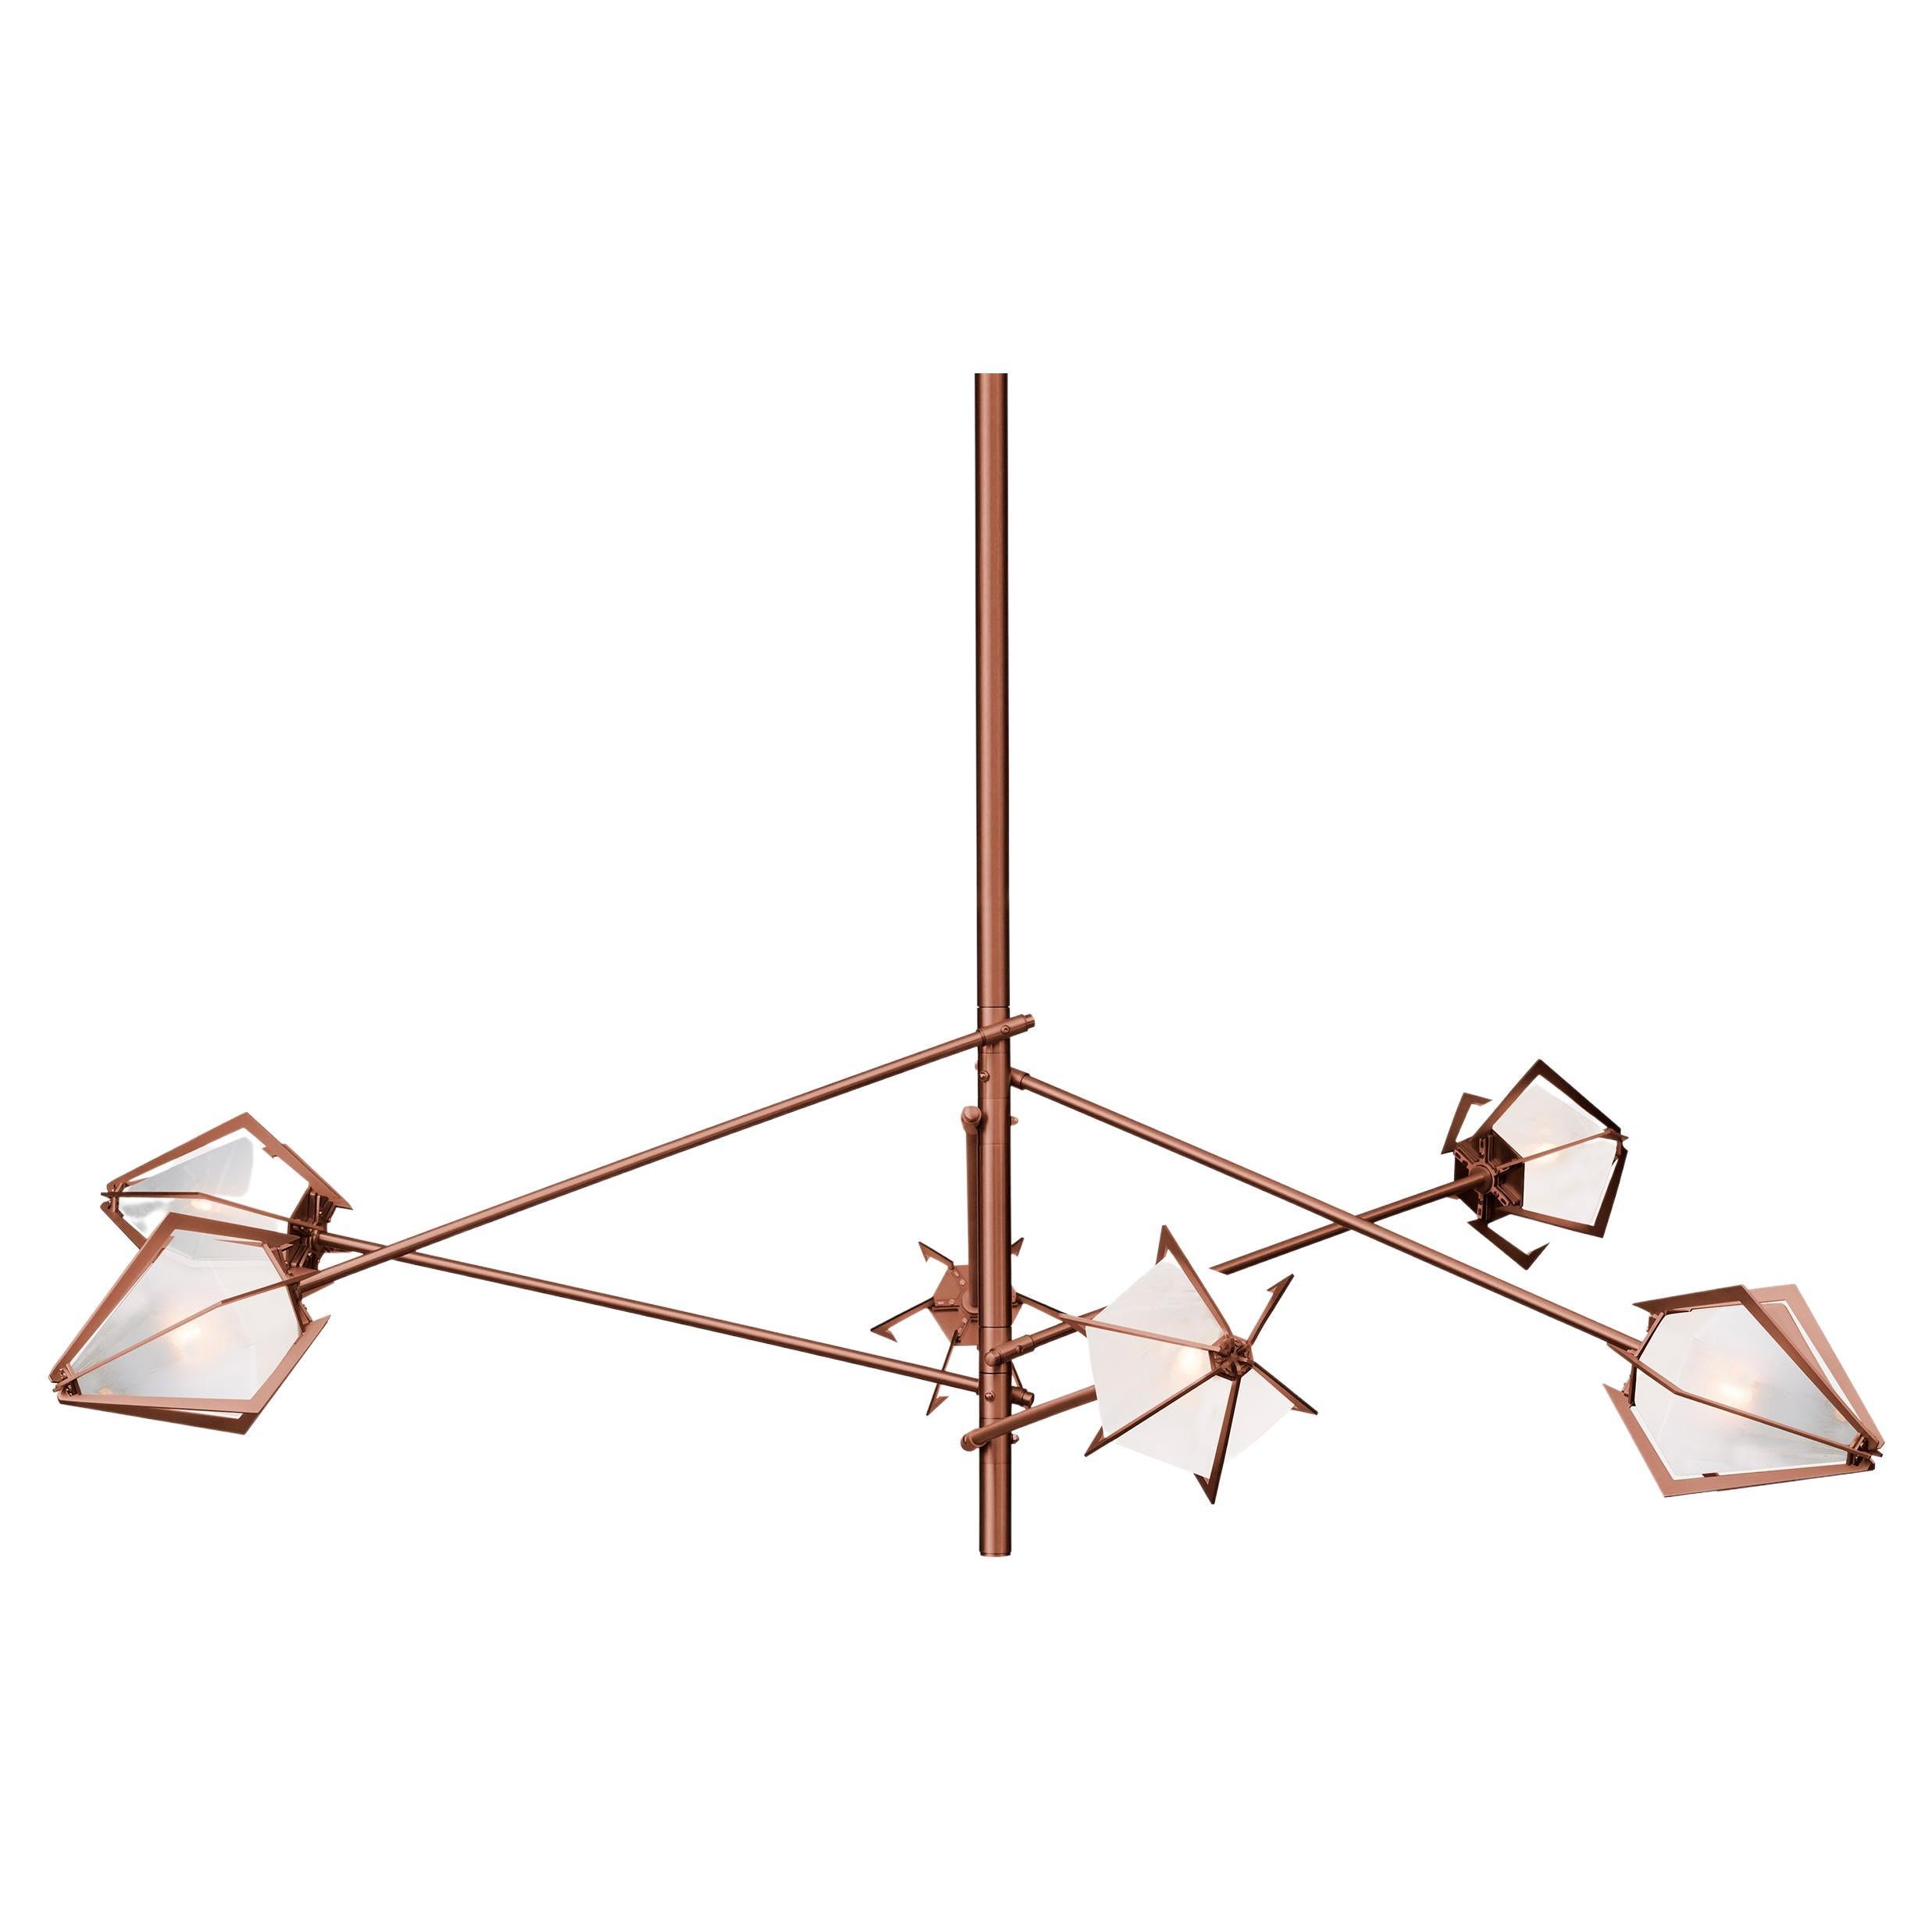 Harlow Spoke Chandelier Large in Satin Copper and Alabaster White Glass